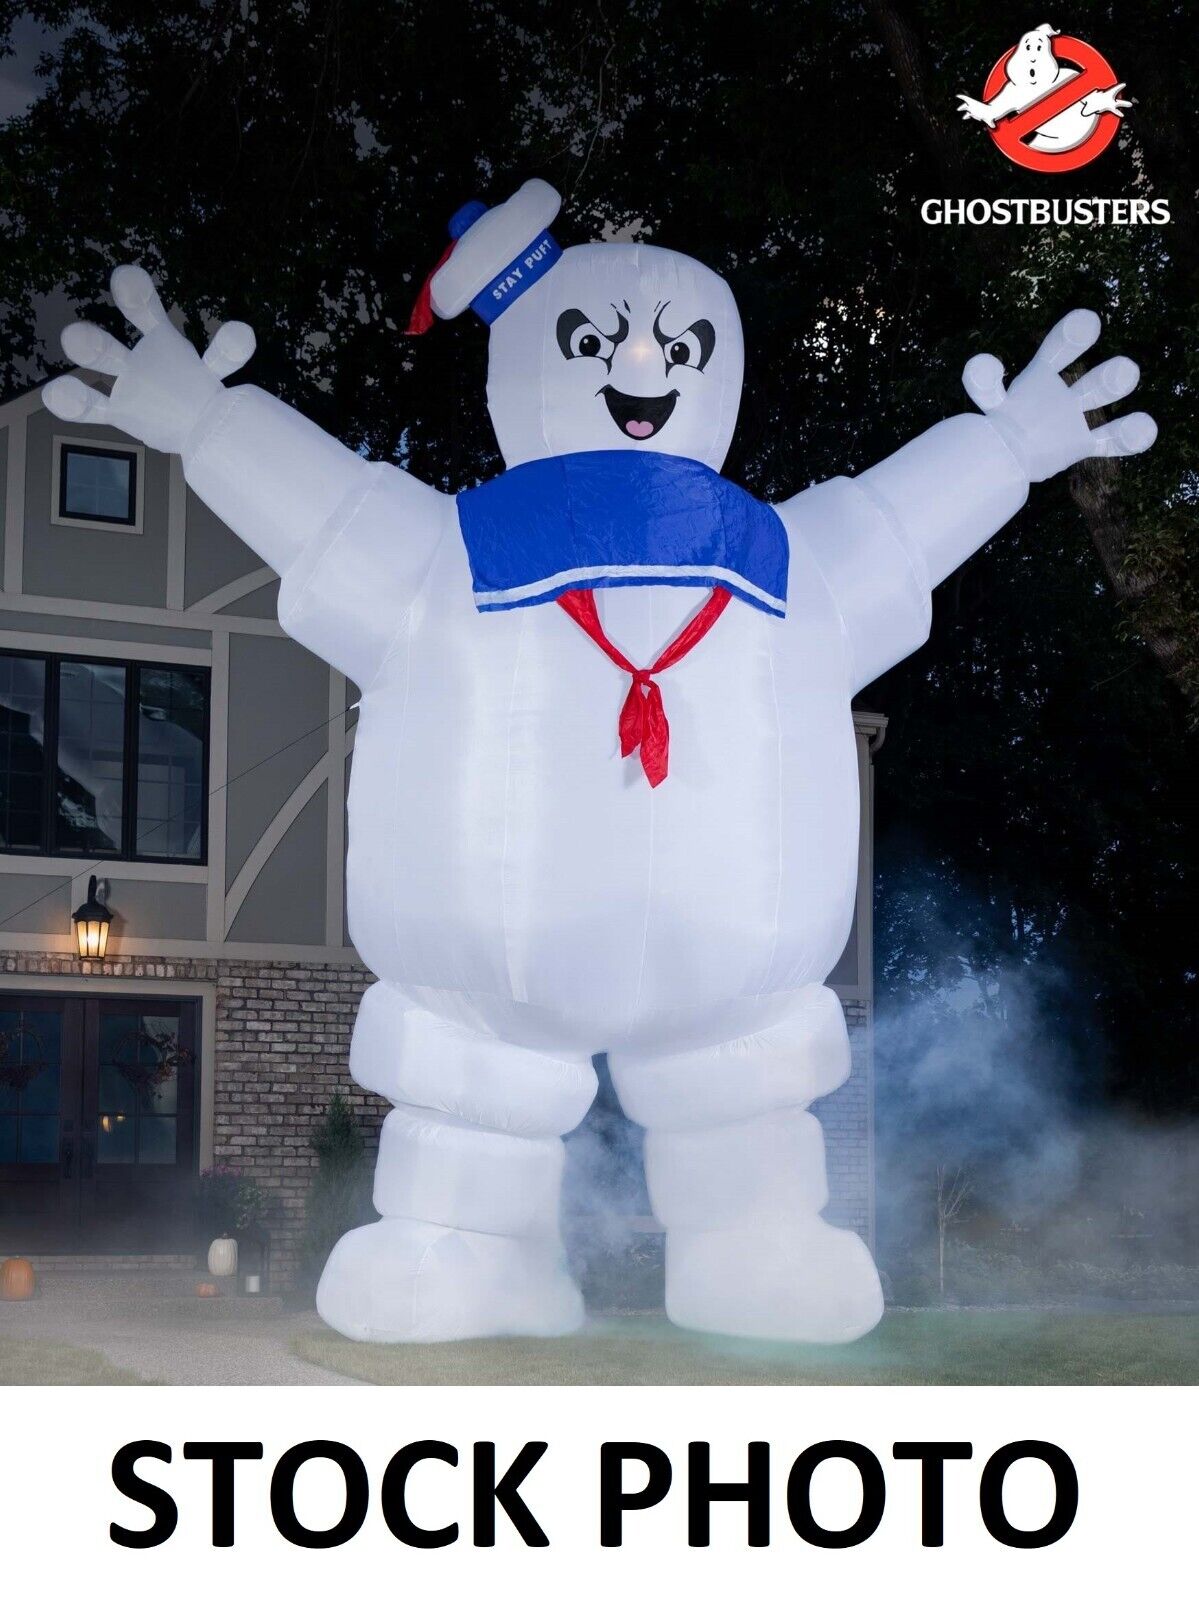 Ghostbusters Stay Puft Marshmallow 25ft Yard Inflatable Decor (Used, Repaired).